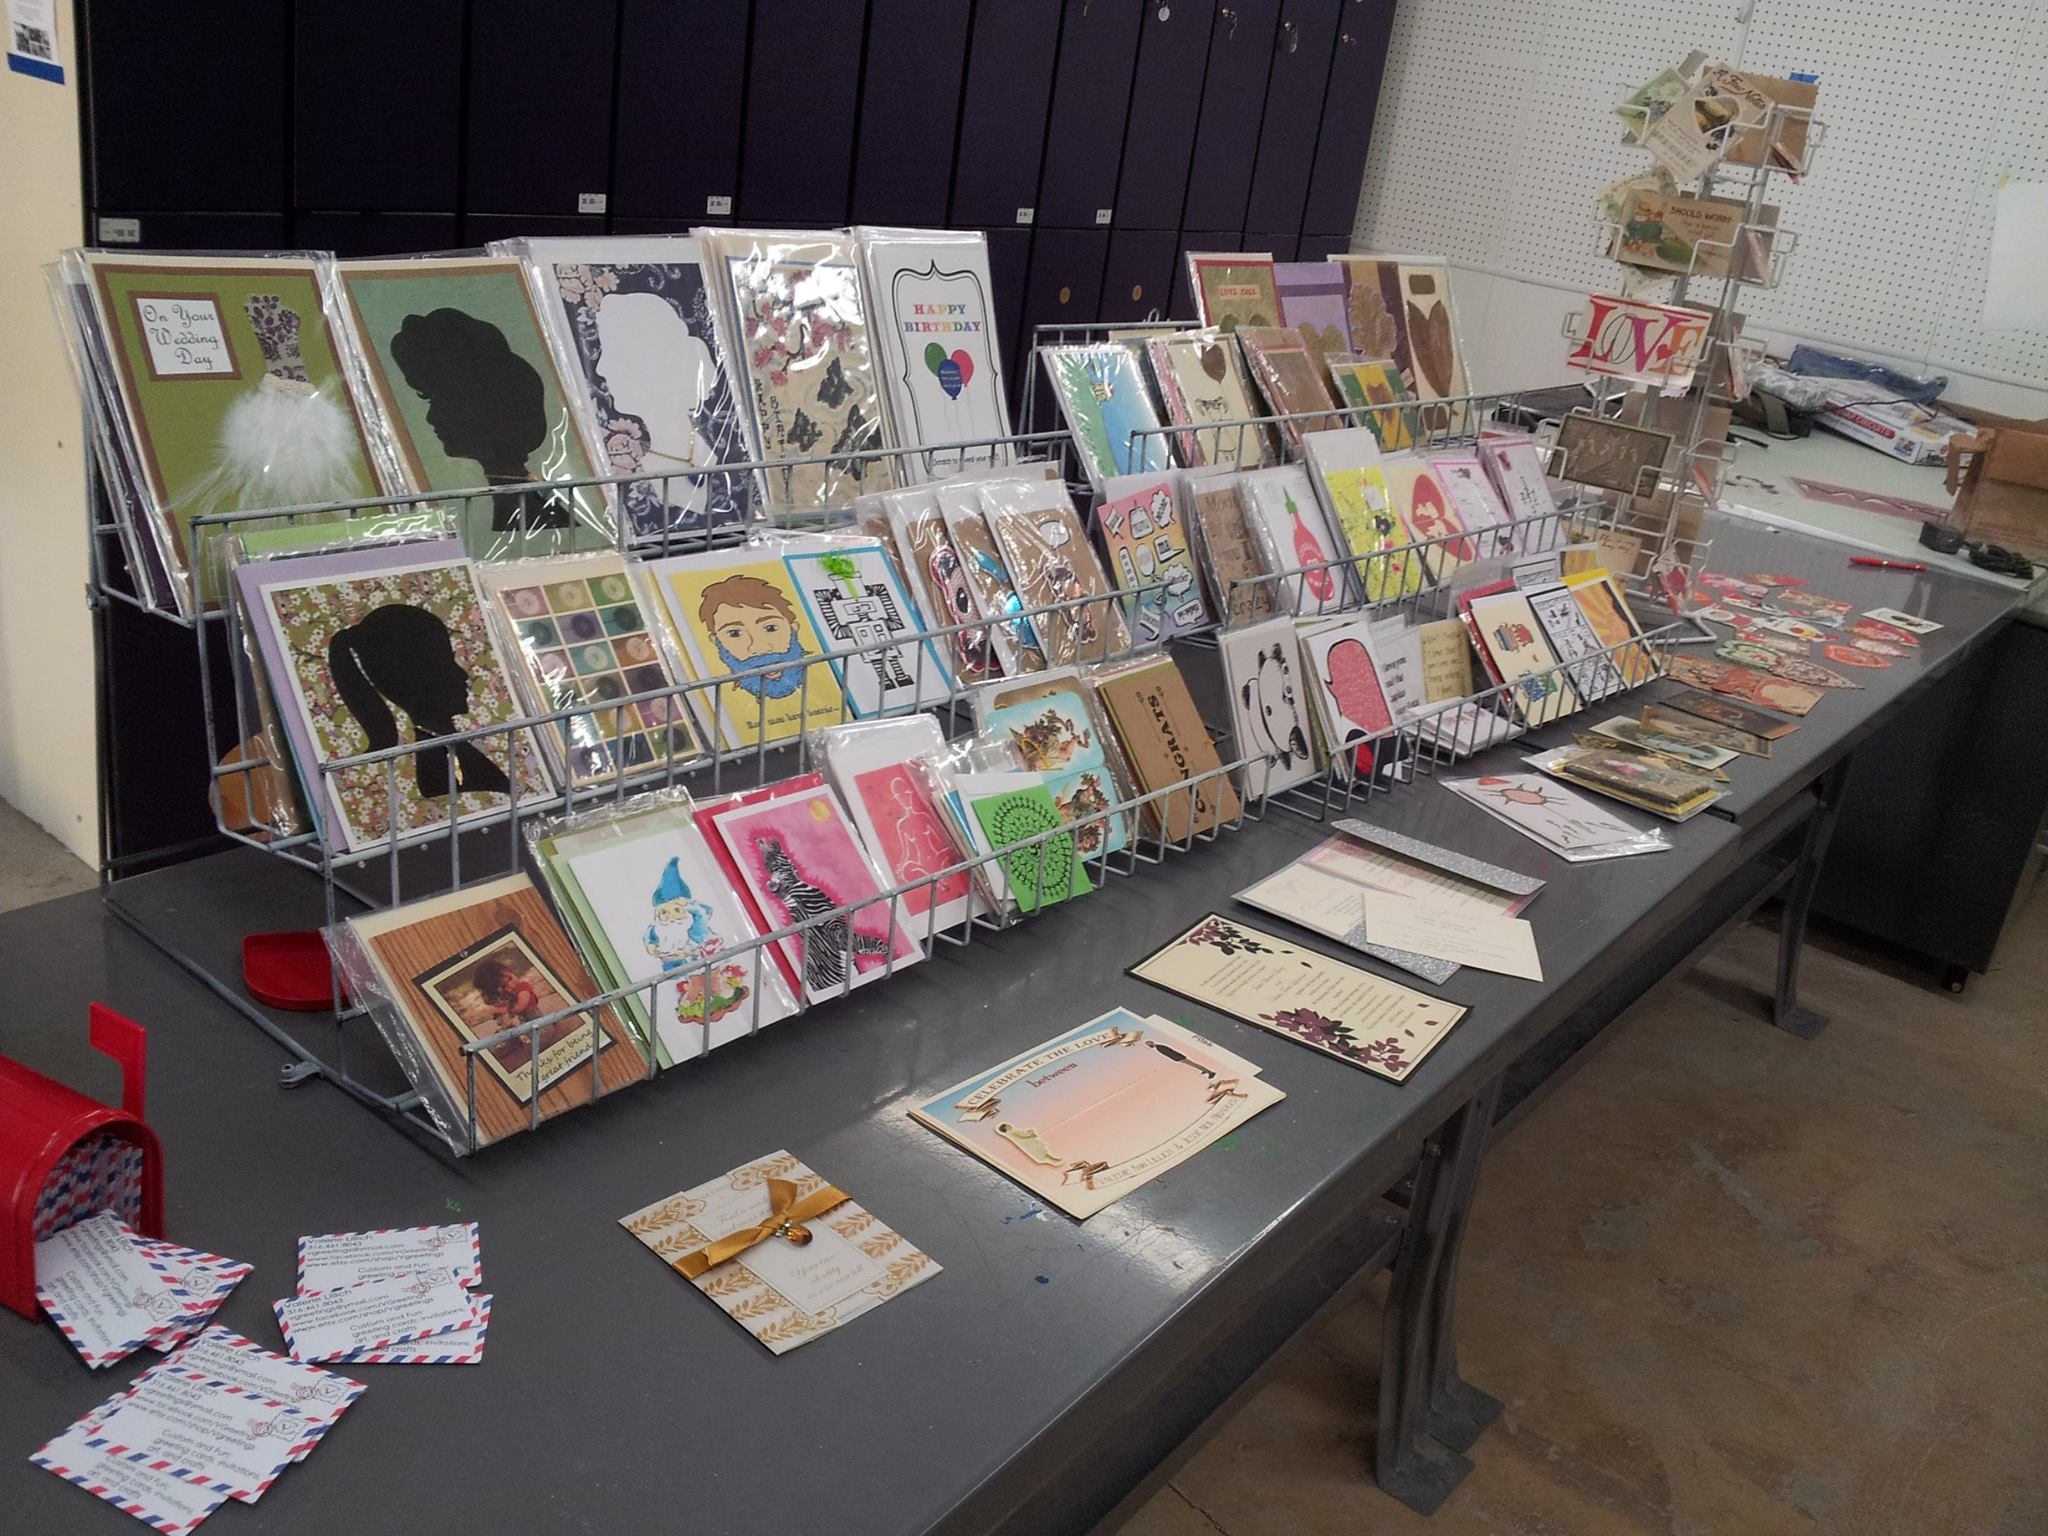 Examples of Val's hand-made greeting cards